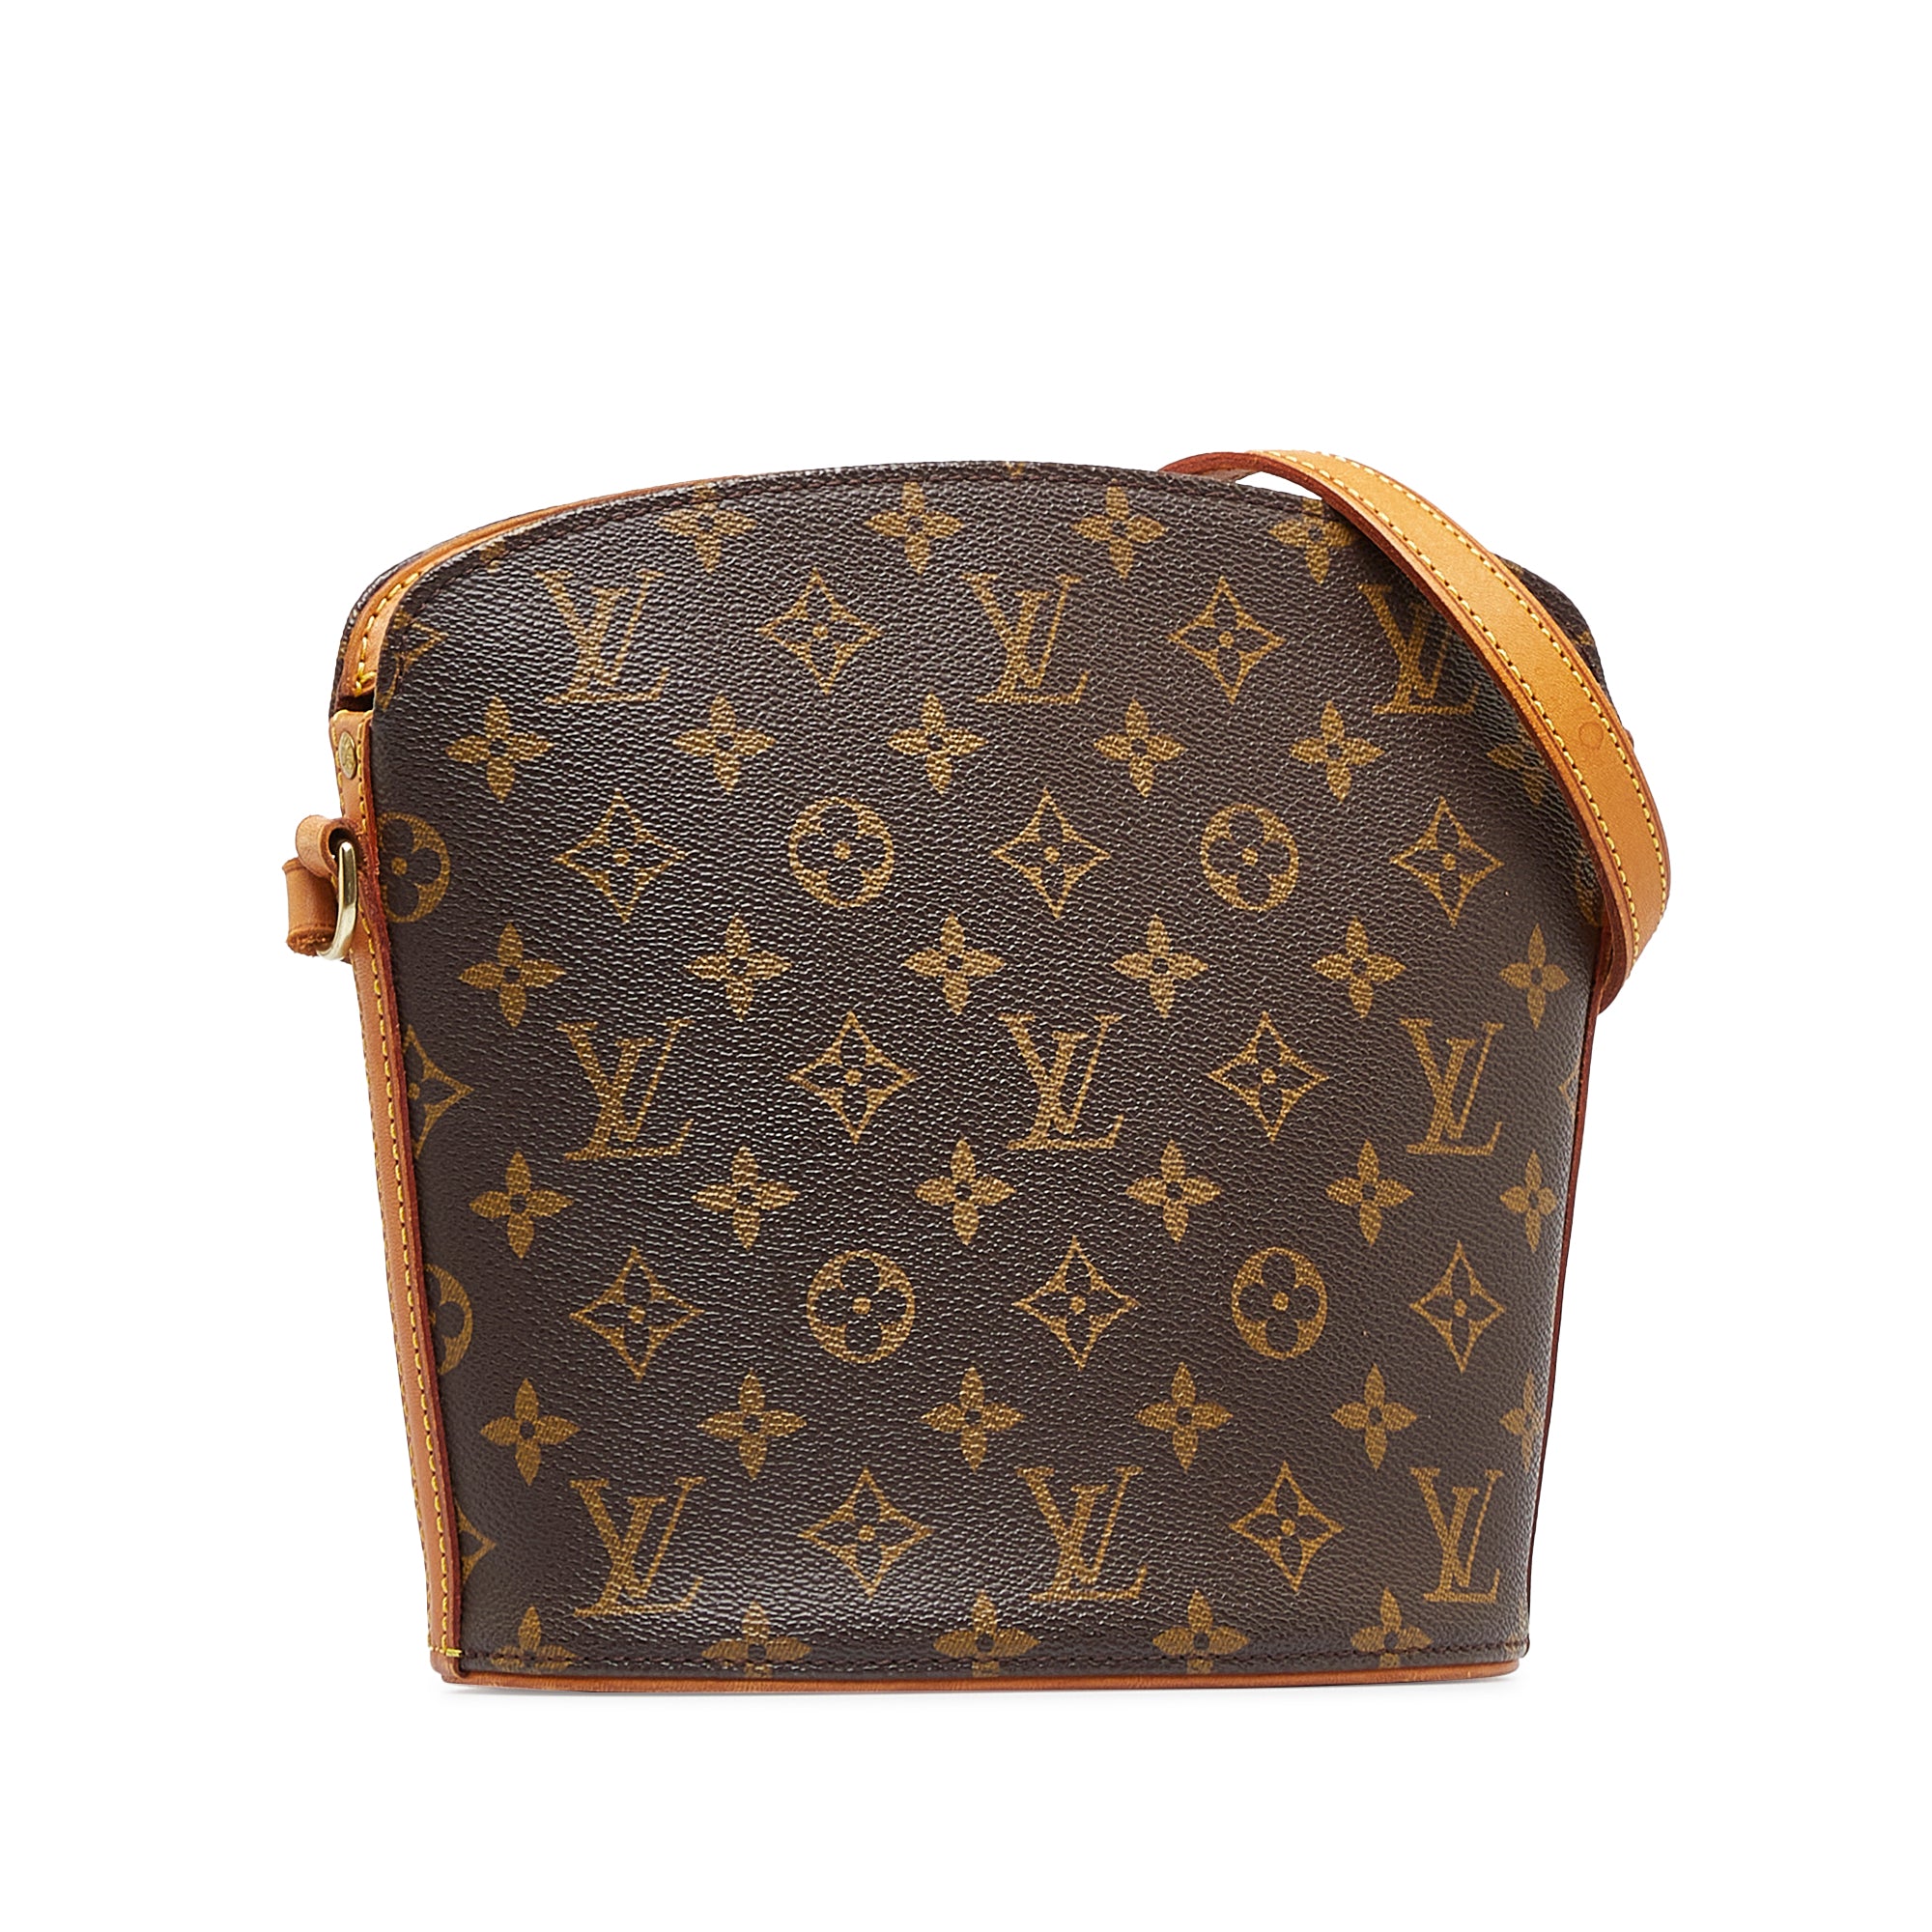 Authentic Louis Vuitton Trotter Crossbody Bag with adjustable